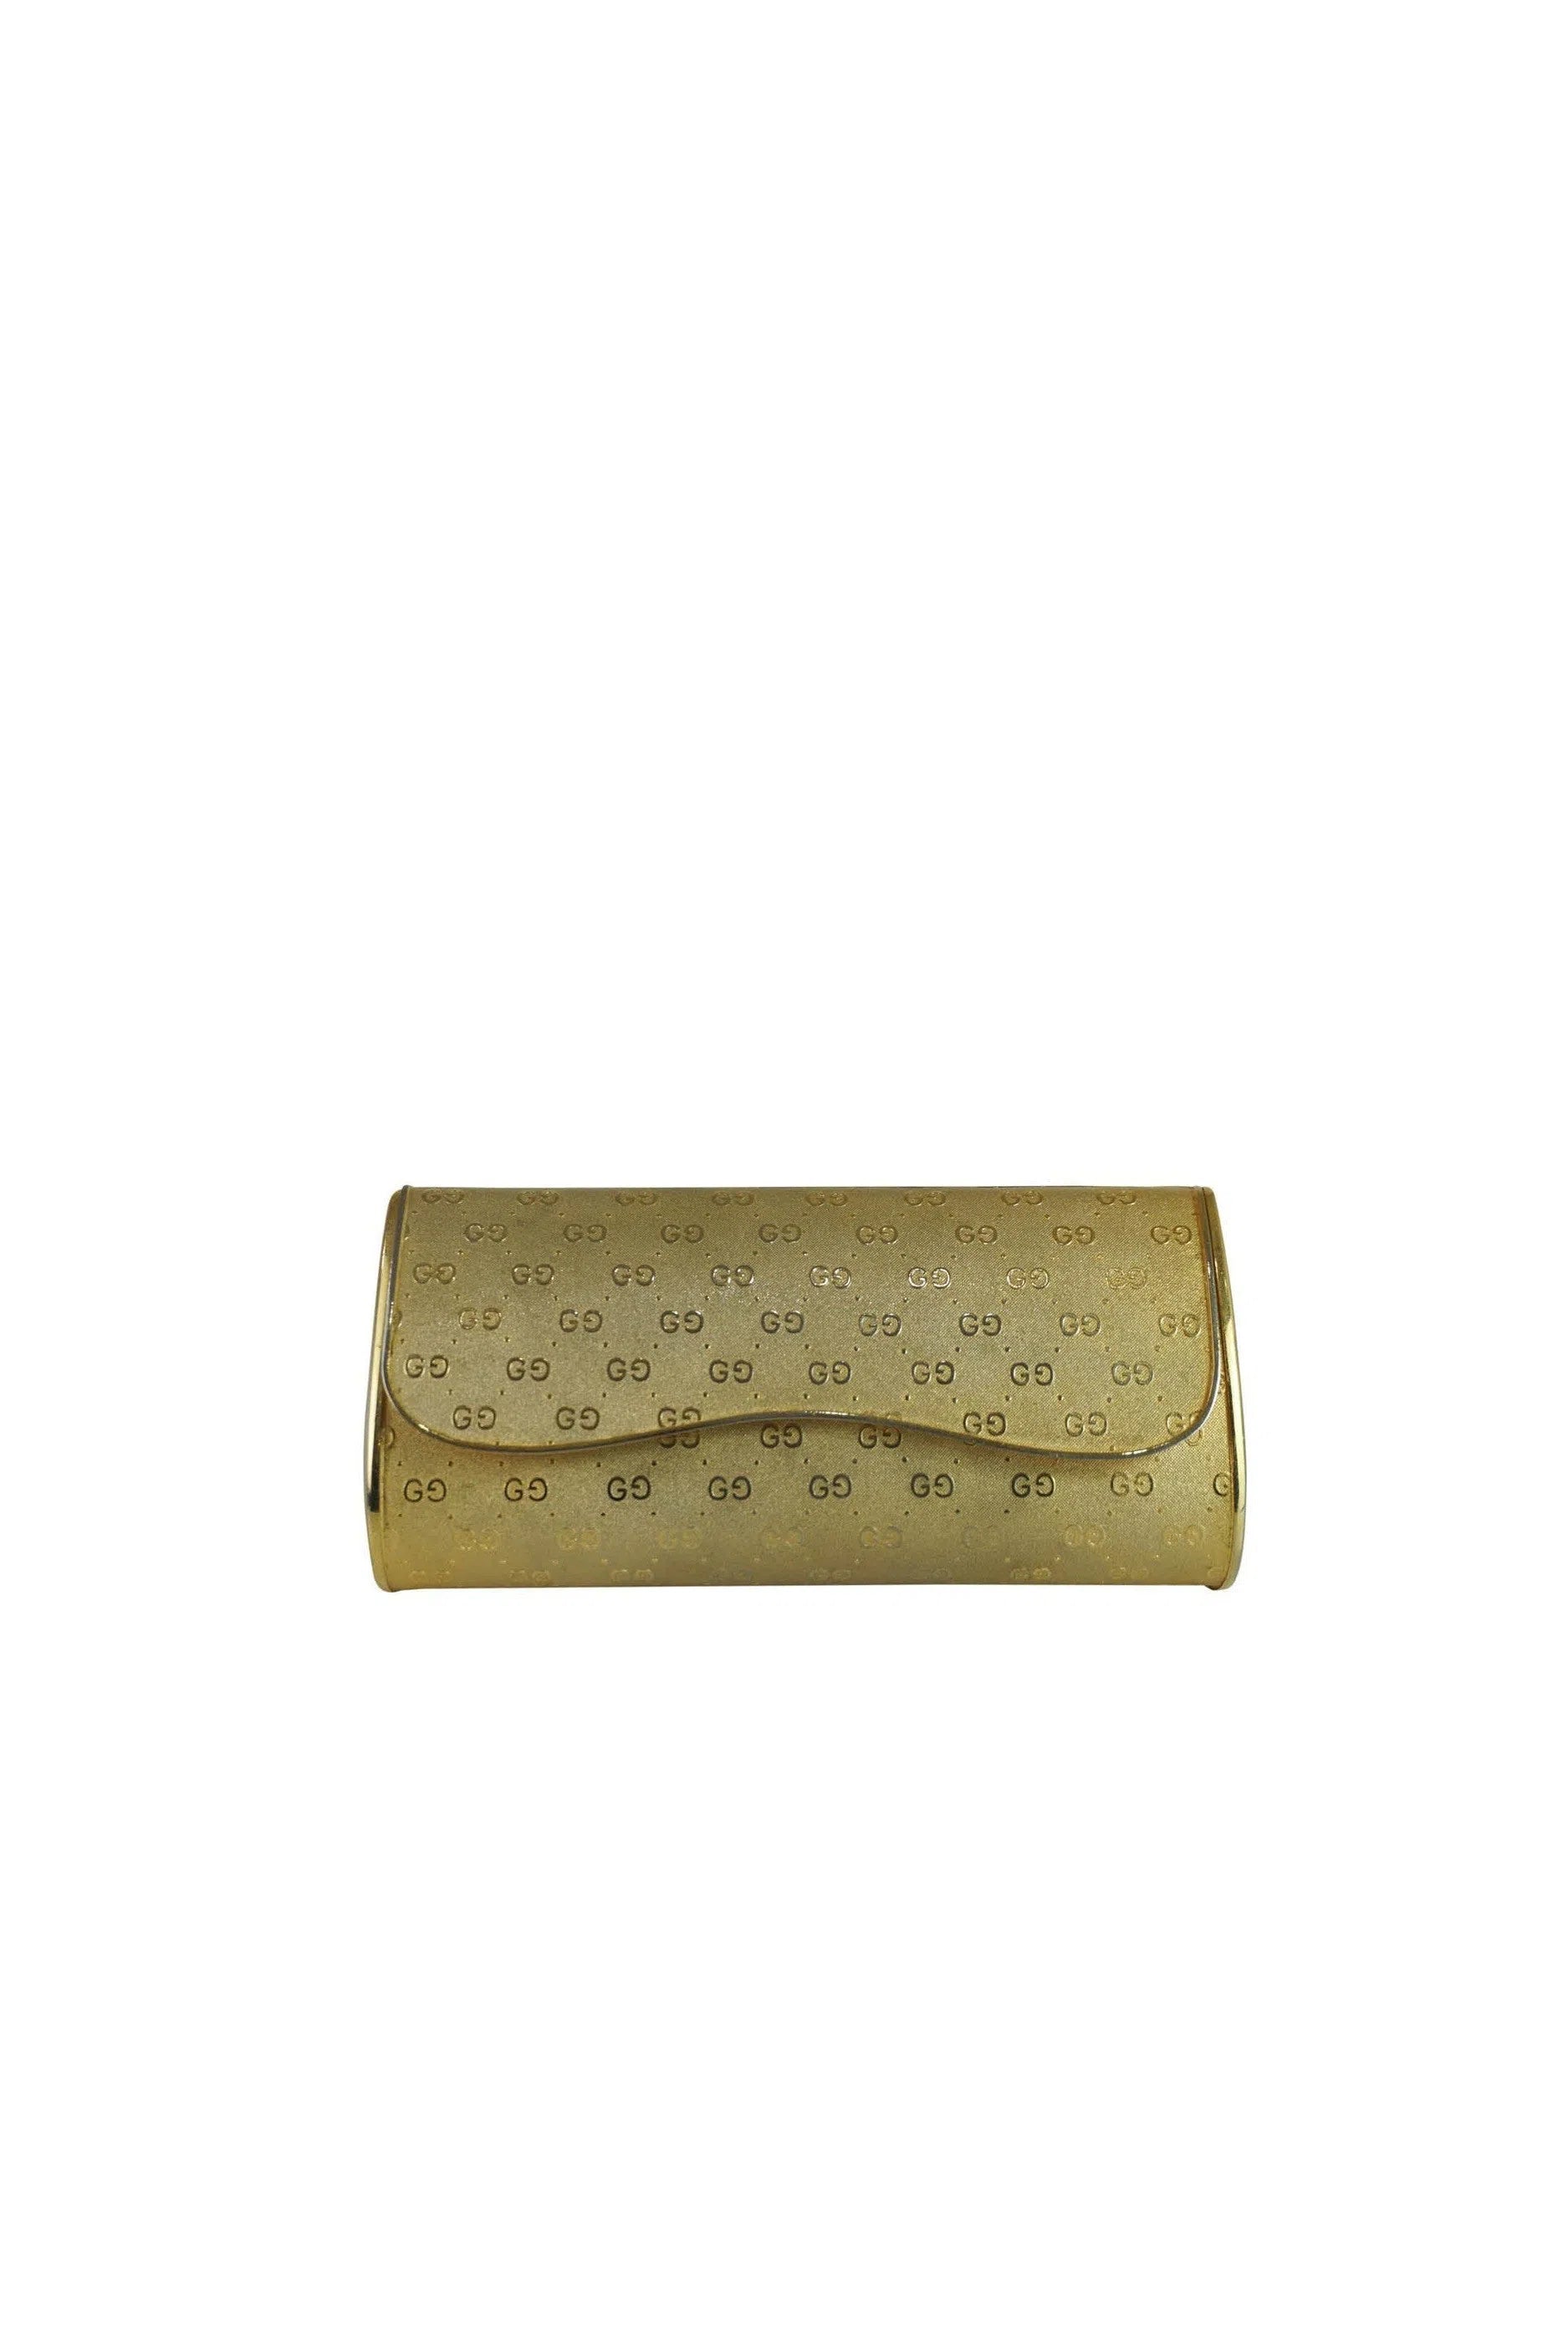 Gucci Gold GG Embossed Minaudière Purse 1970s - Foxy Couture Carmel